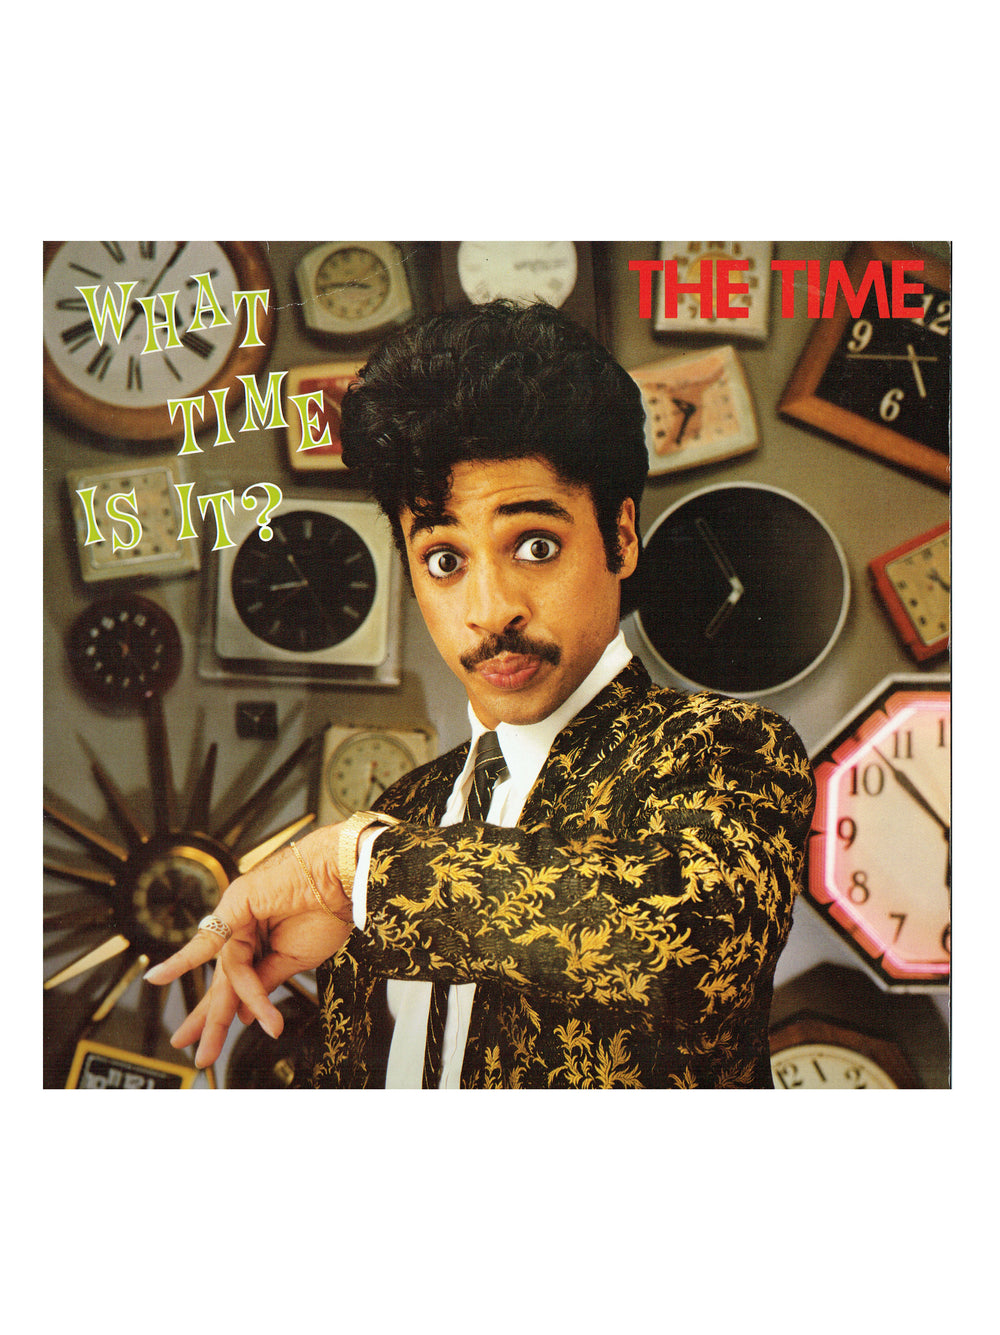 The Time What Time Is It? UK EU Vinyl Album Original Release 1982 Prince SMS